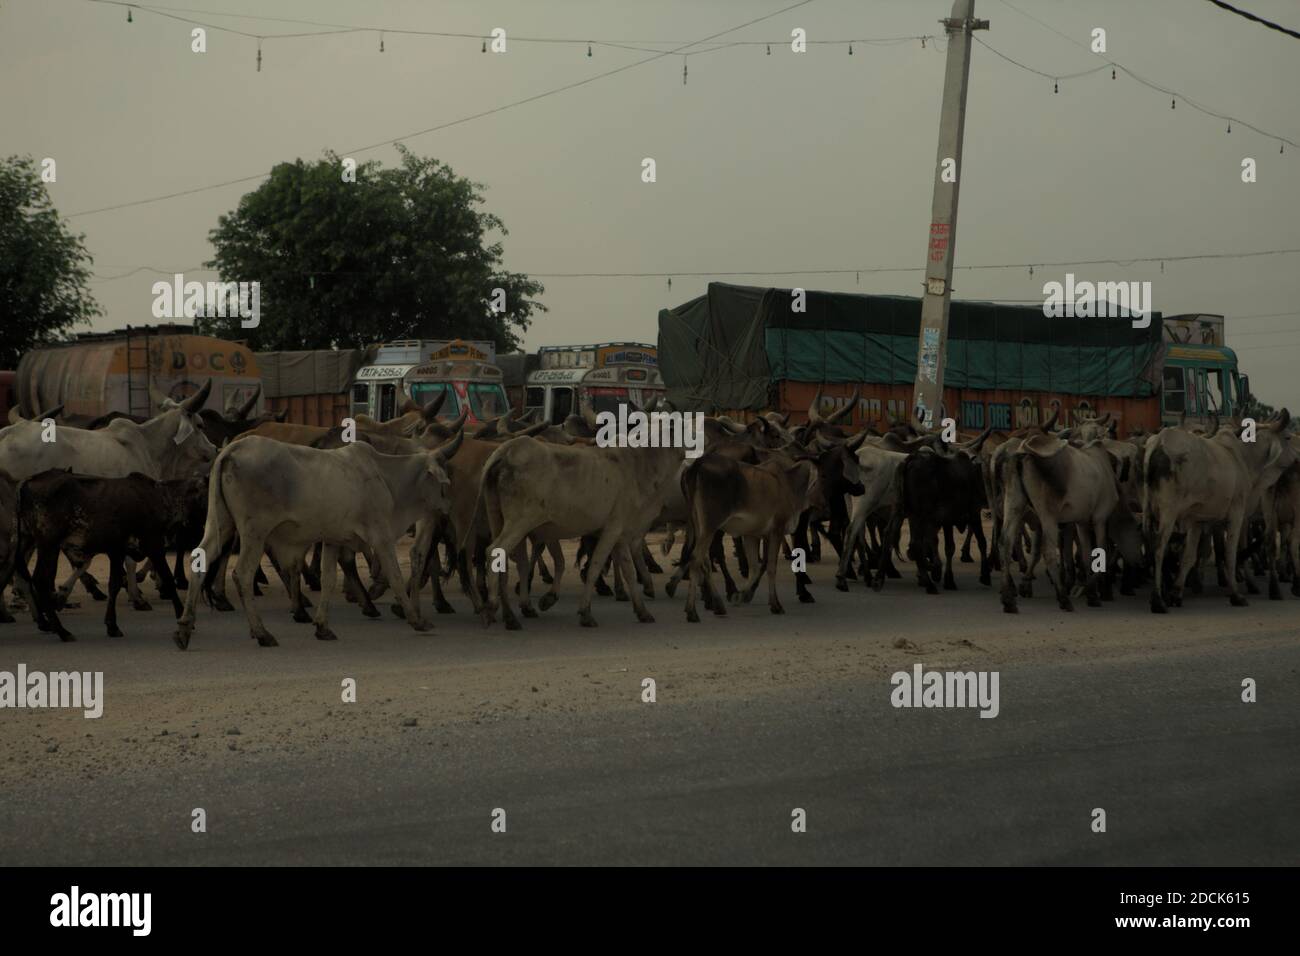 Cattle travelling on the side of a road with trucks in the background. Rajasthan, India. Stock Photo